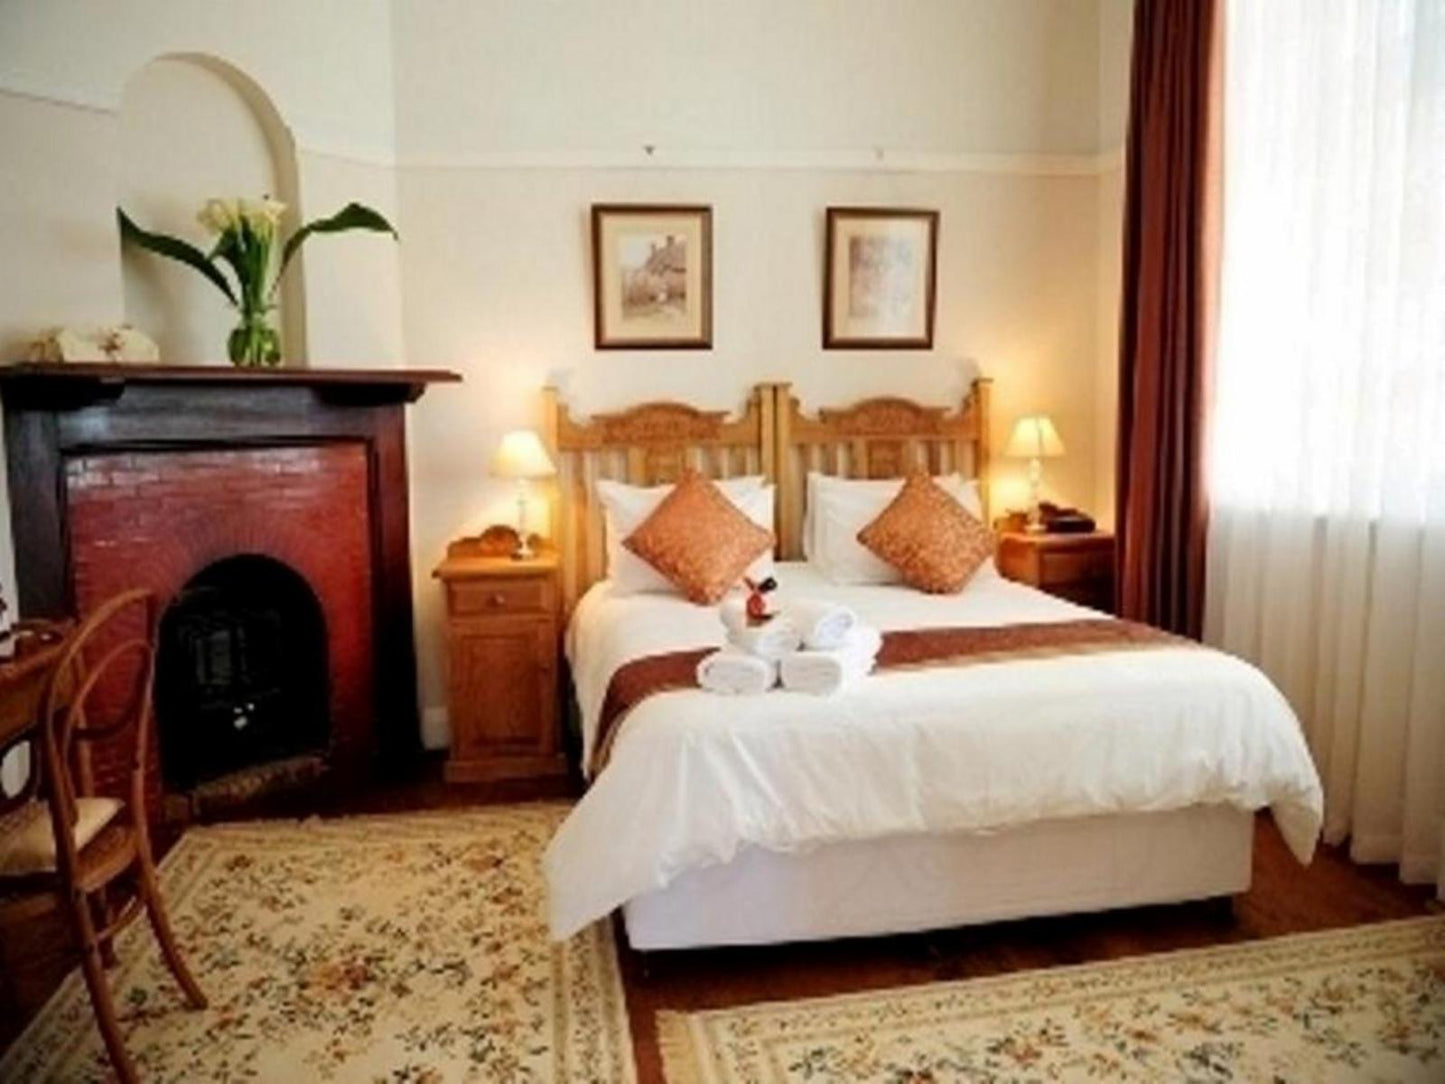 Double Room @ Excelsior Manor Guesthouse